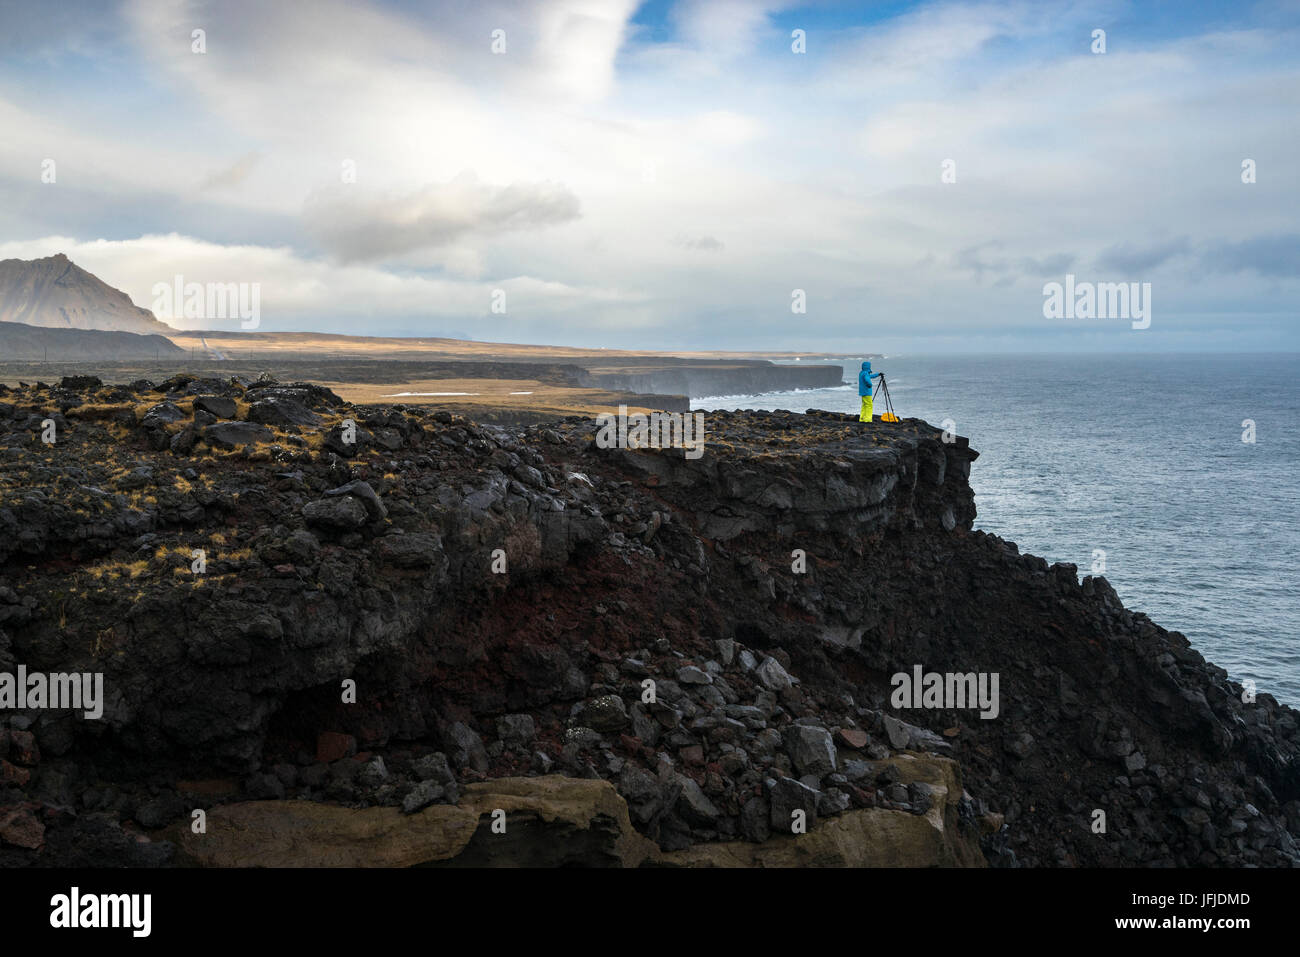 A photographer is taking pictures with tripod standing on the cliffs near Londrangar, Snaefellsjoekull National Park, Western Iceland, Europe Stock Photo